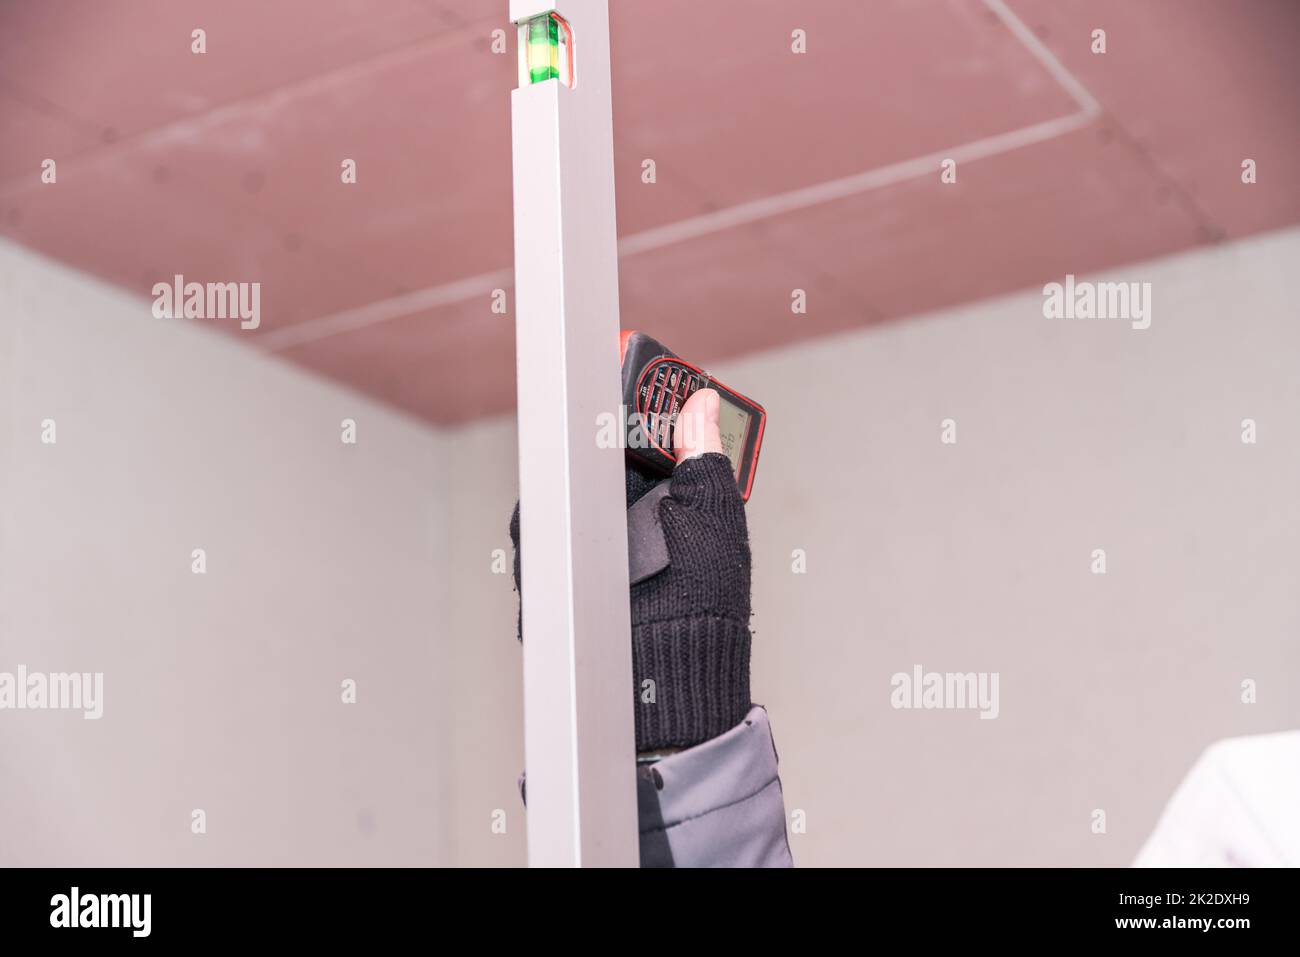 Technician measuring the distance with an infrared measuring device and a spirit level Stock Photo